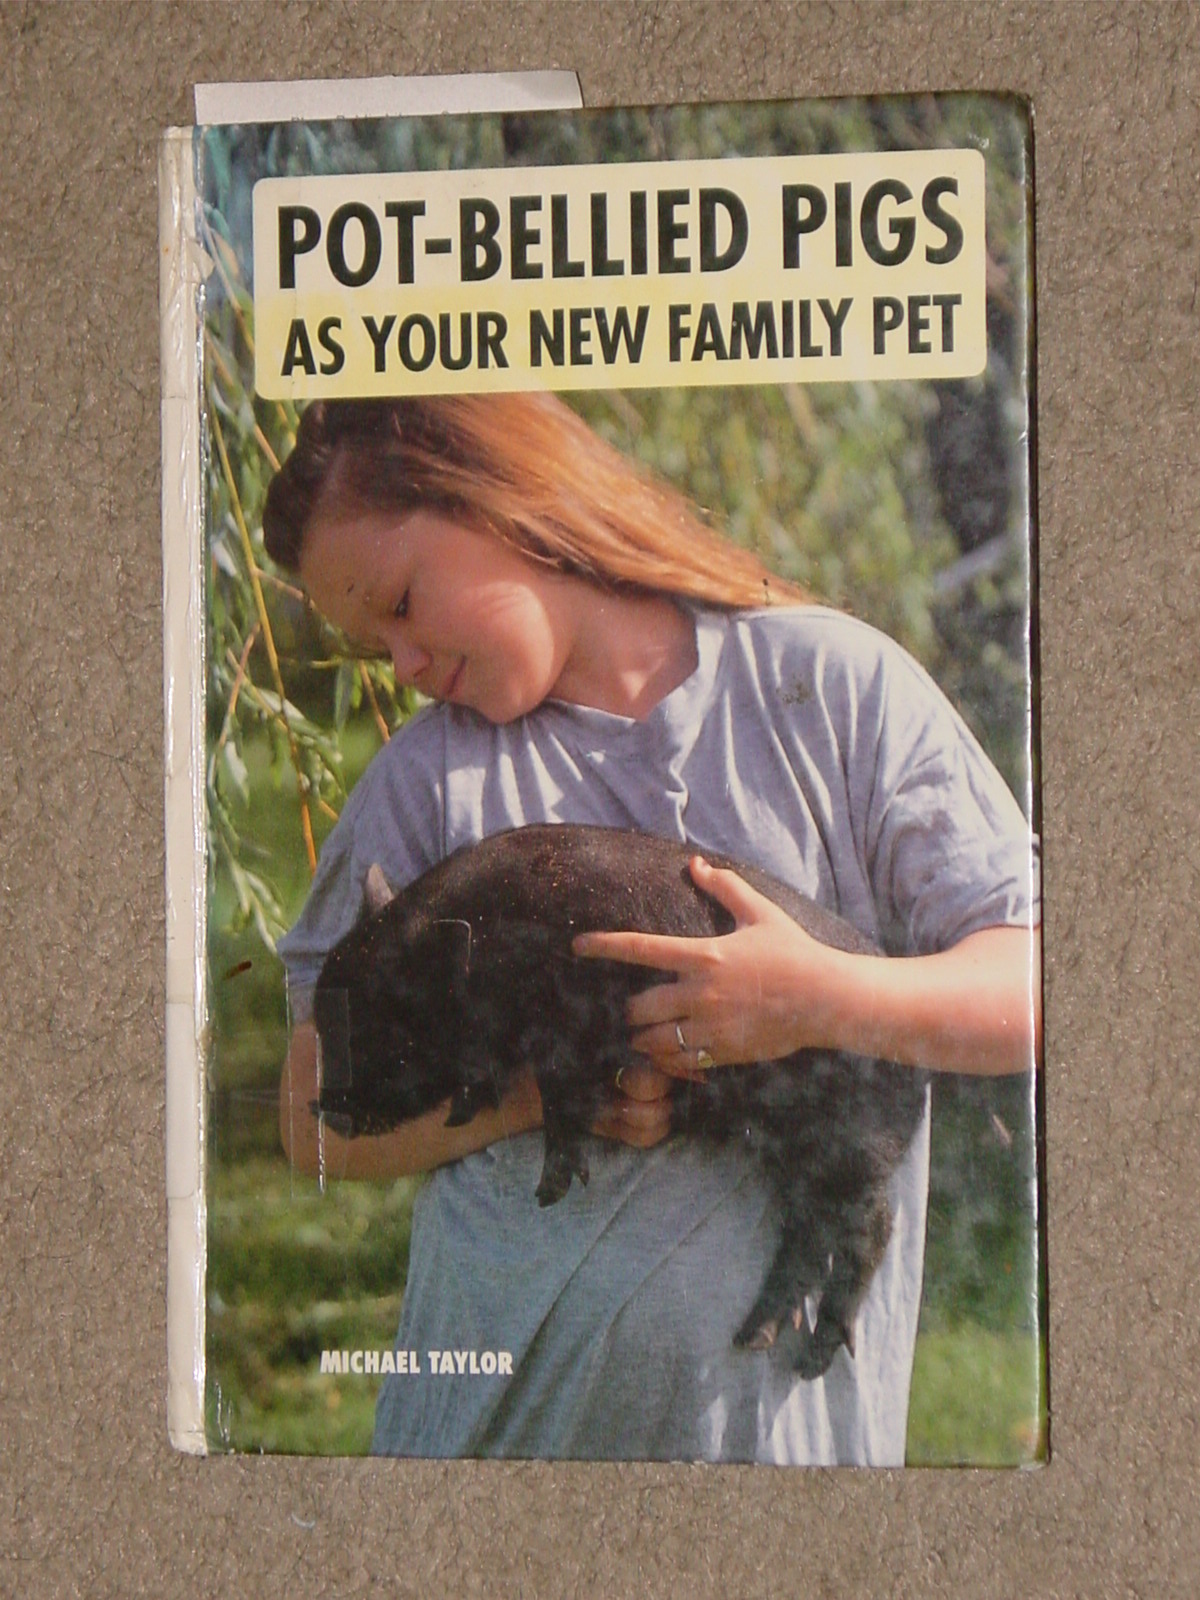 41-8743. Pot-Bellied Pigs As Your New Family Pet.